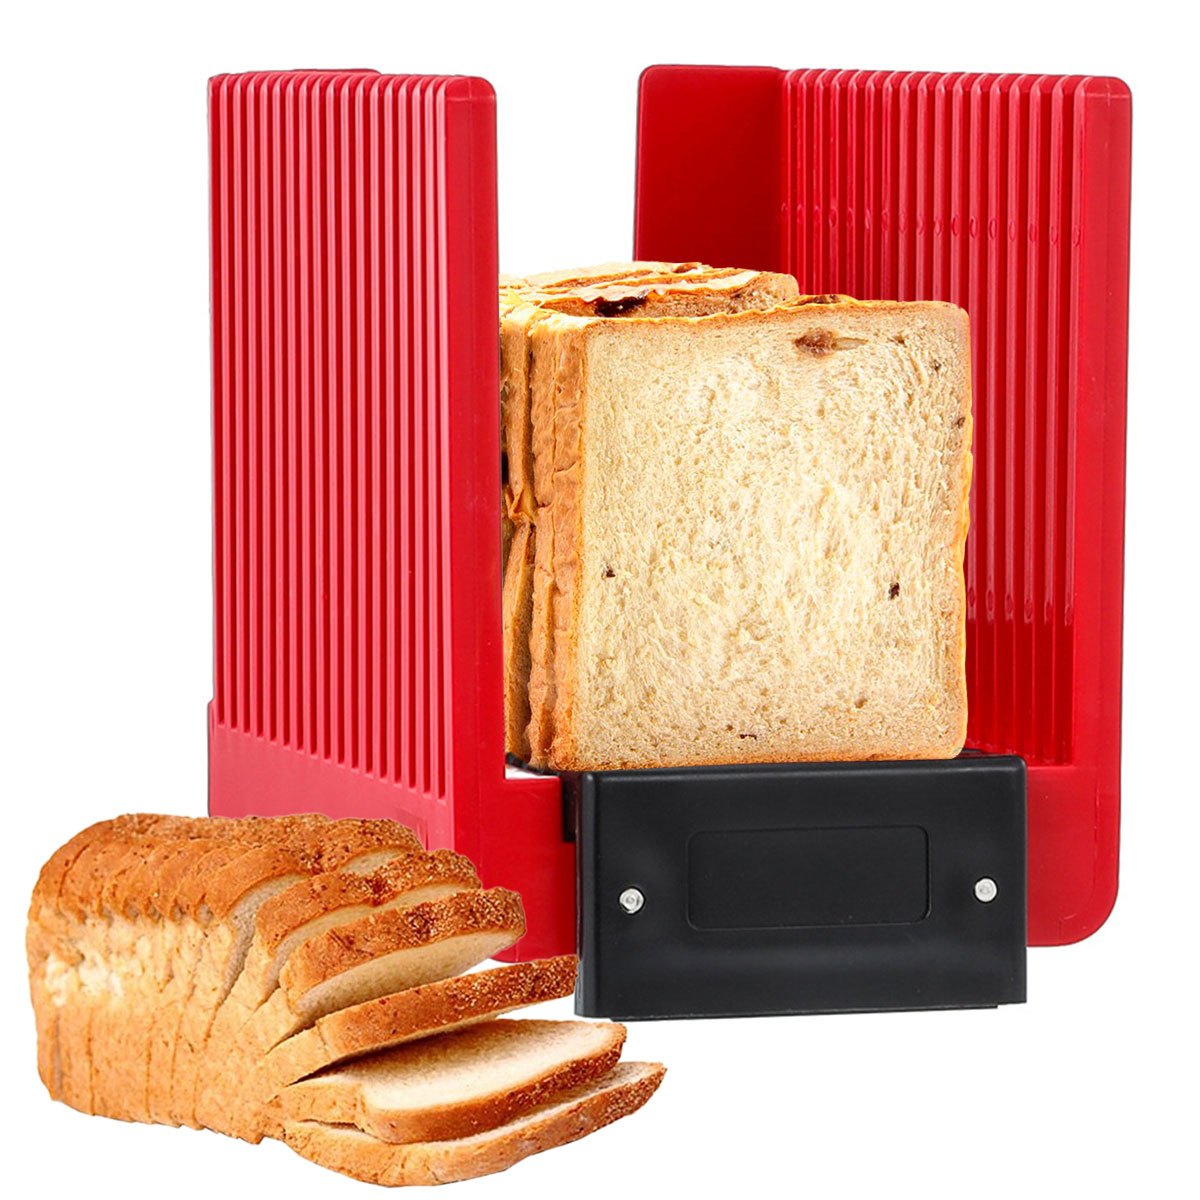 Manual Bread Table Slicer in Stainless Steel and Formica From the